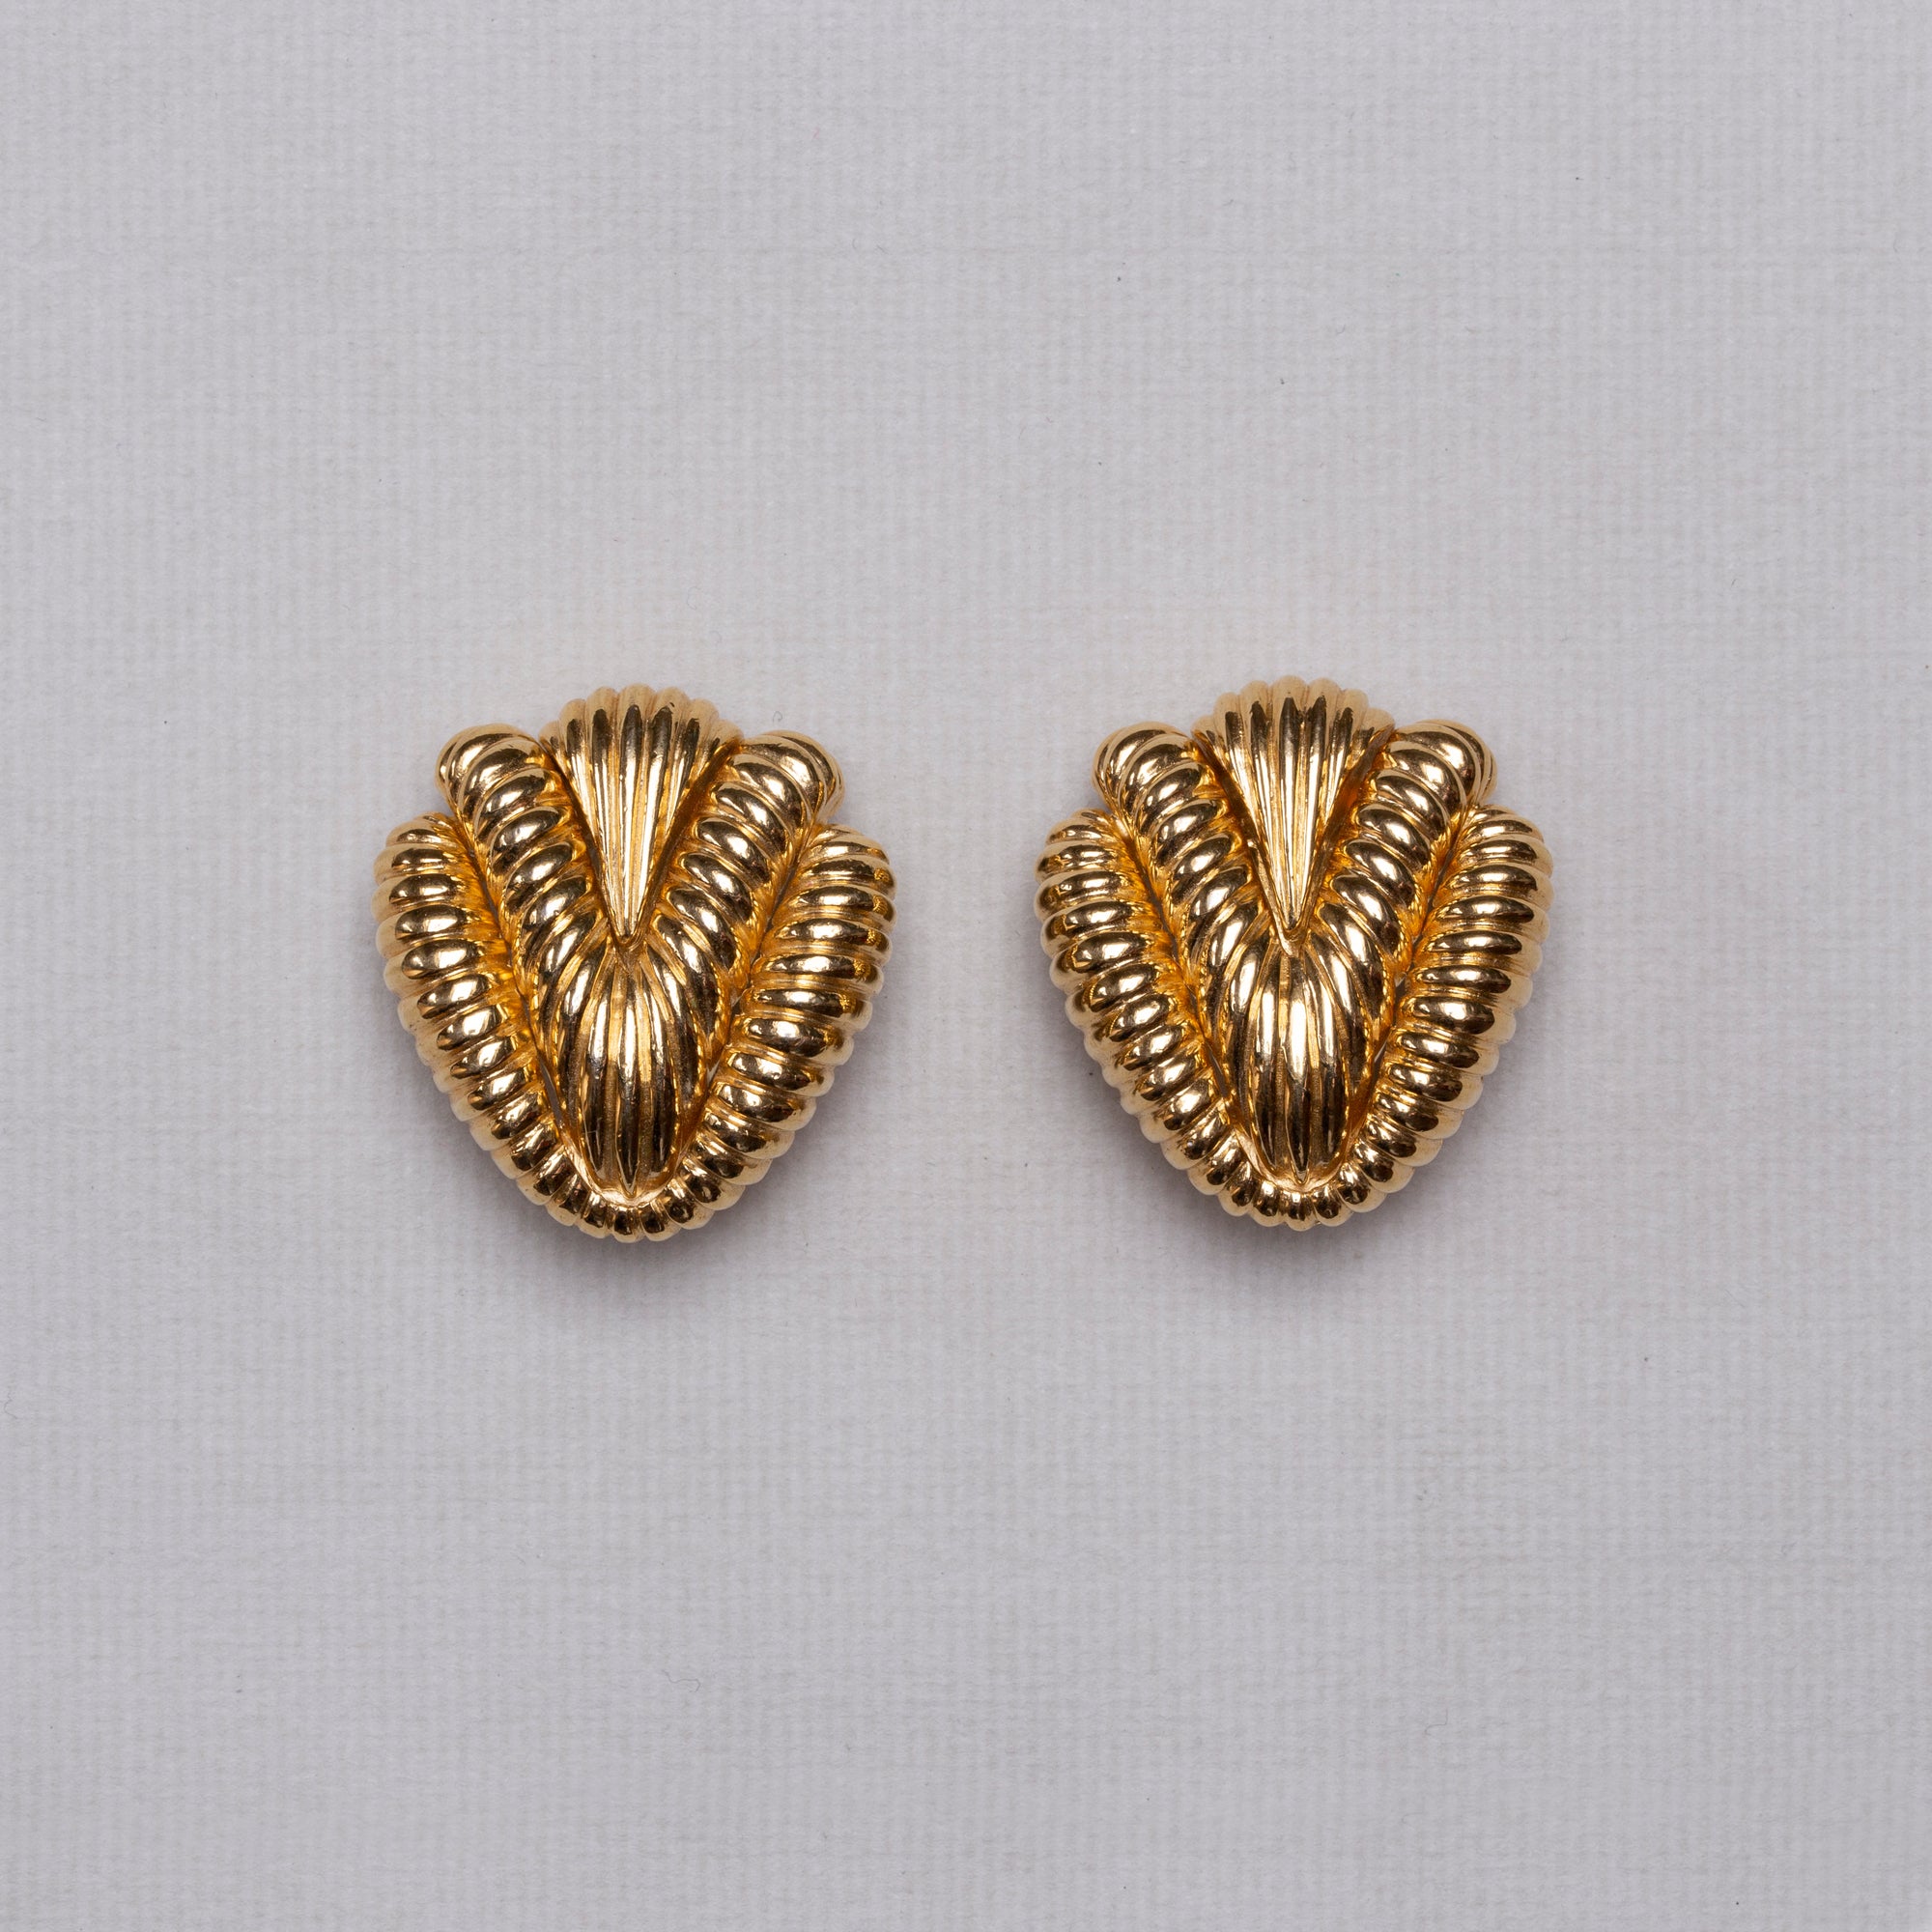 Vintage Textured Gold Clip-on Earrings